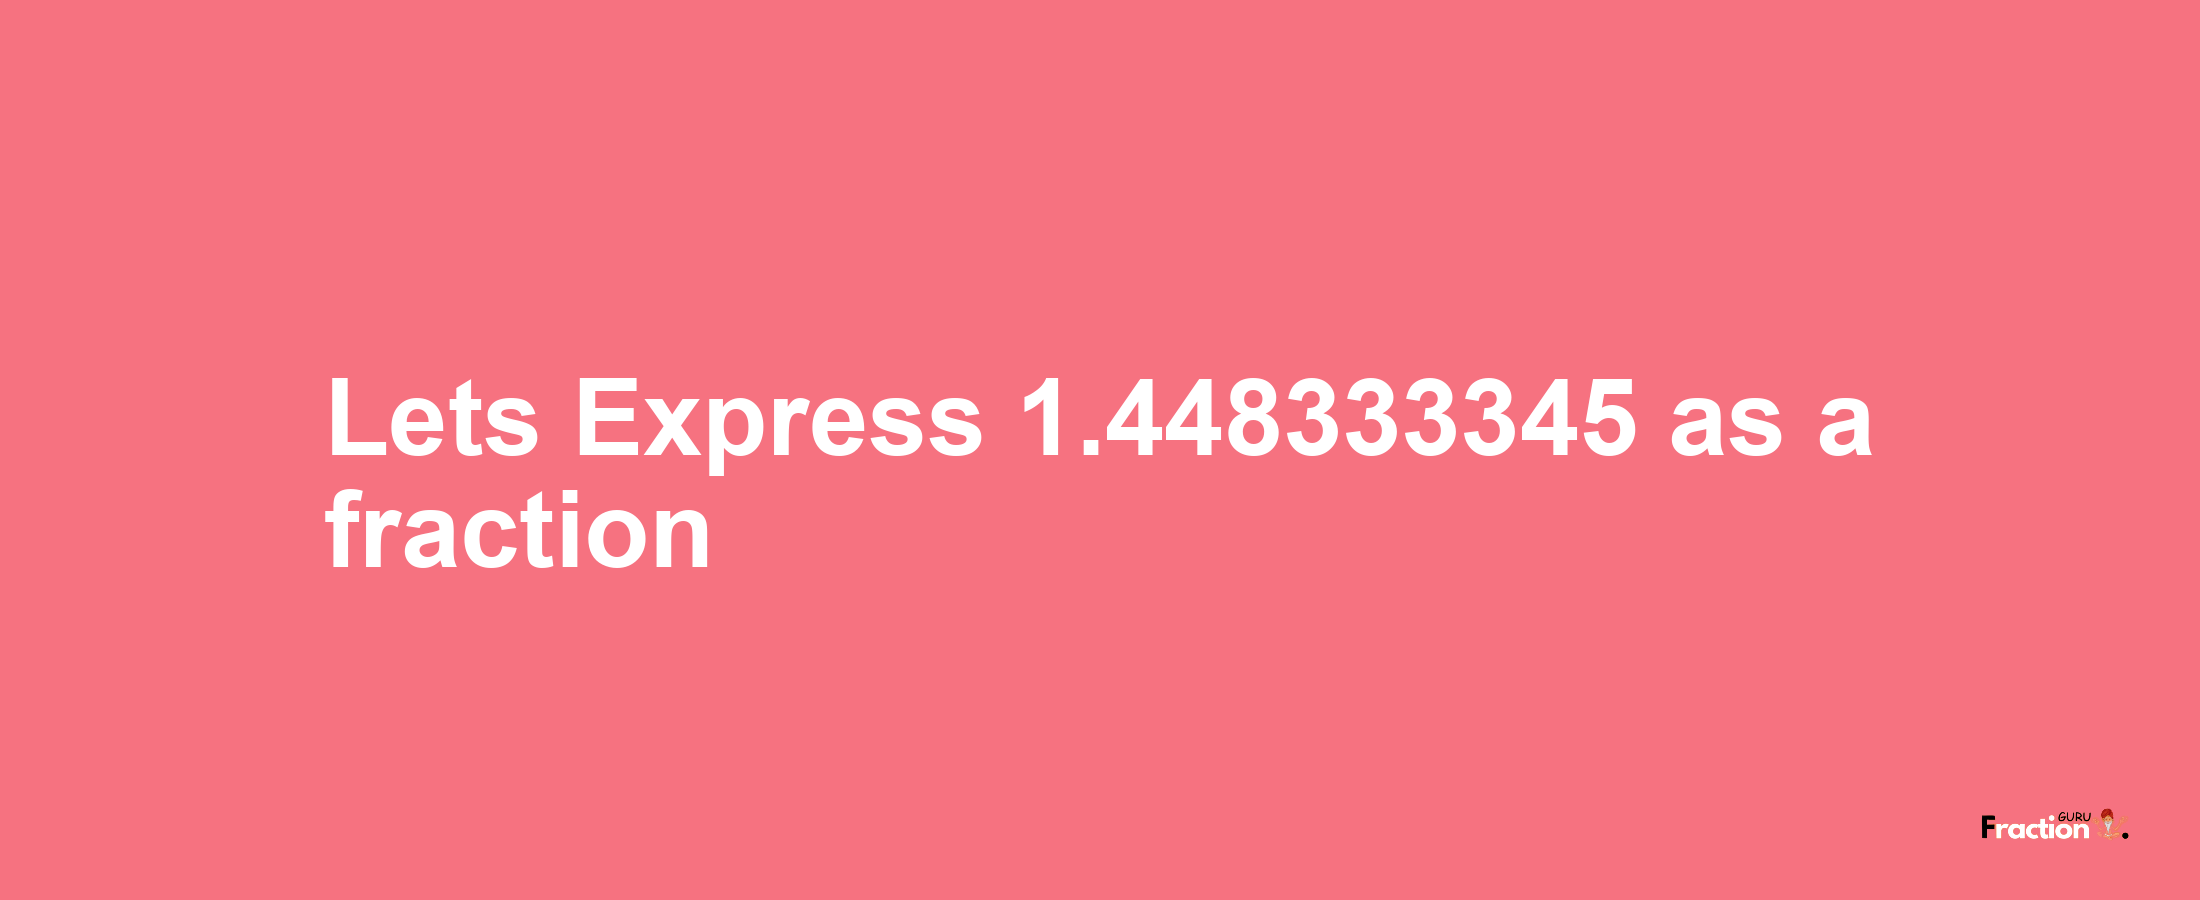 Lets Express 1.448333345 as afraction